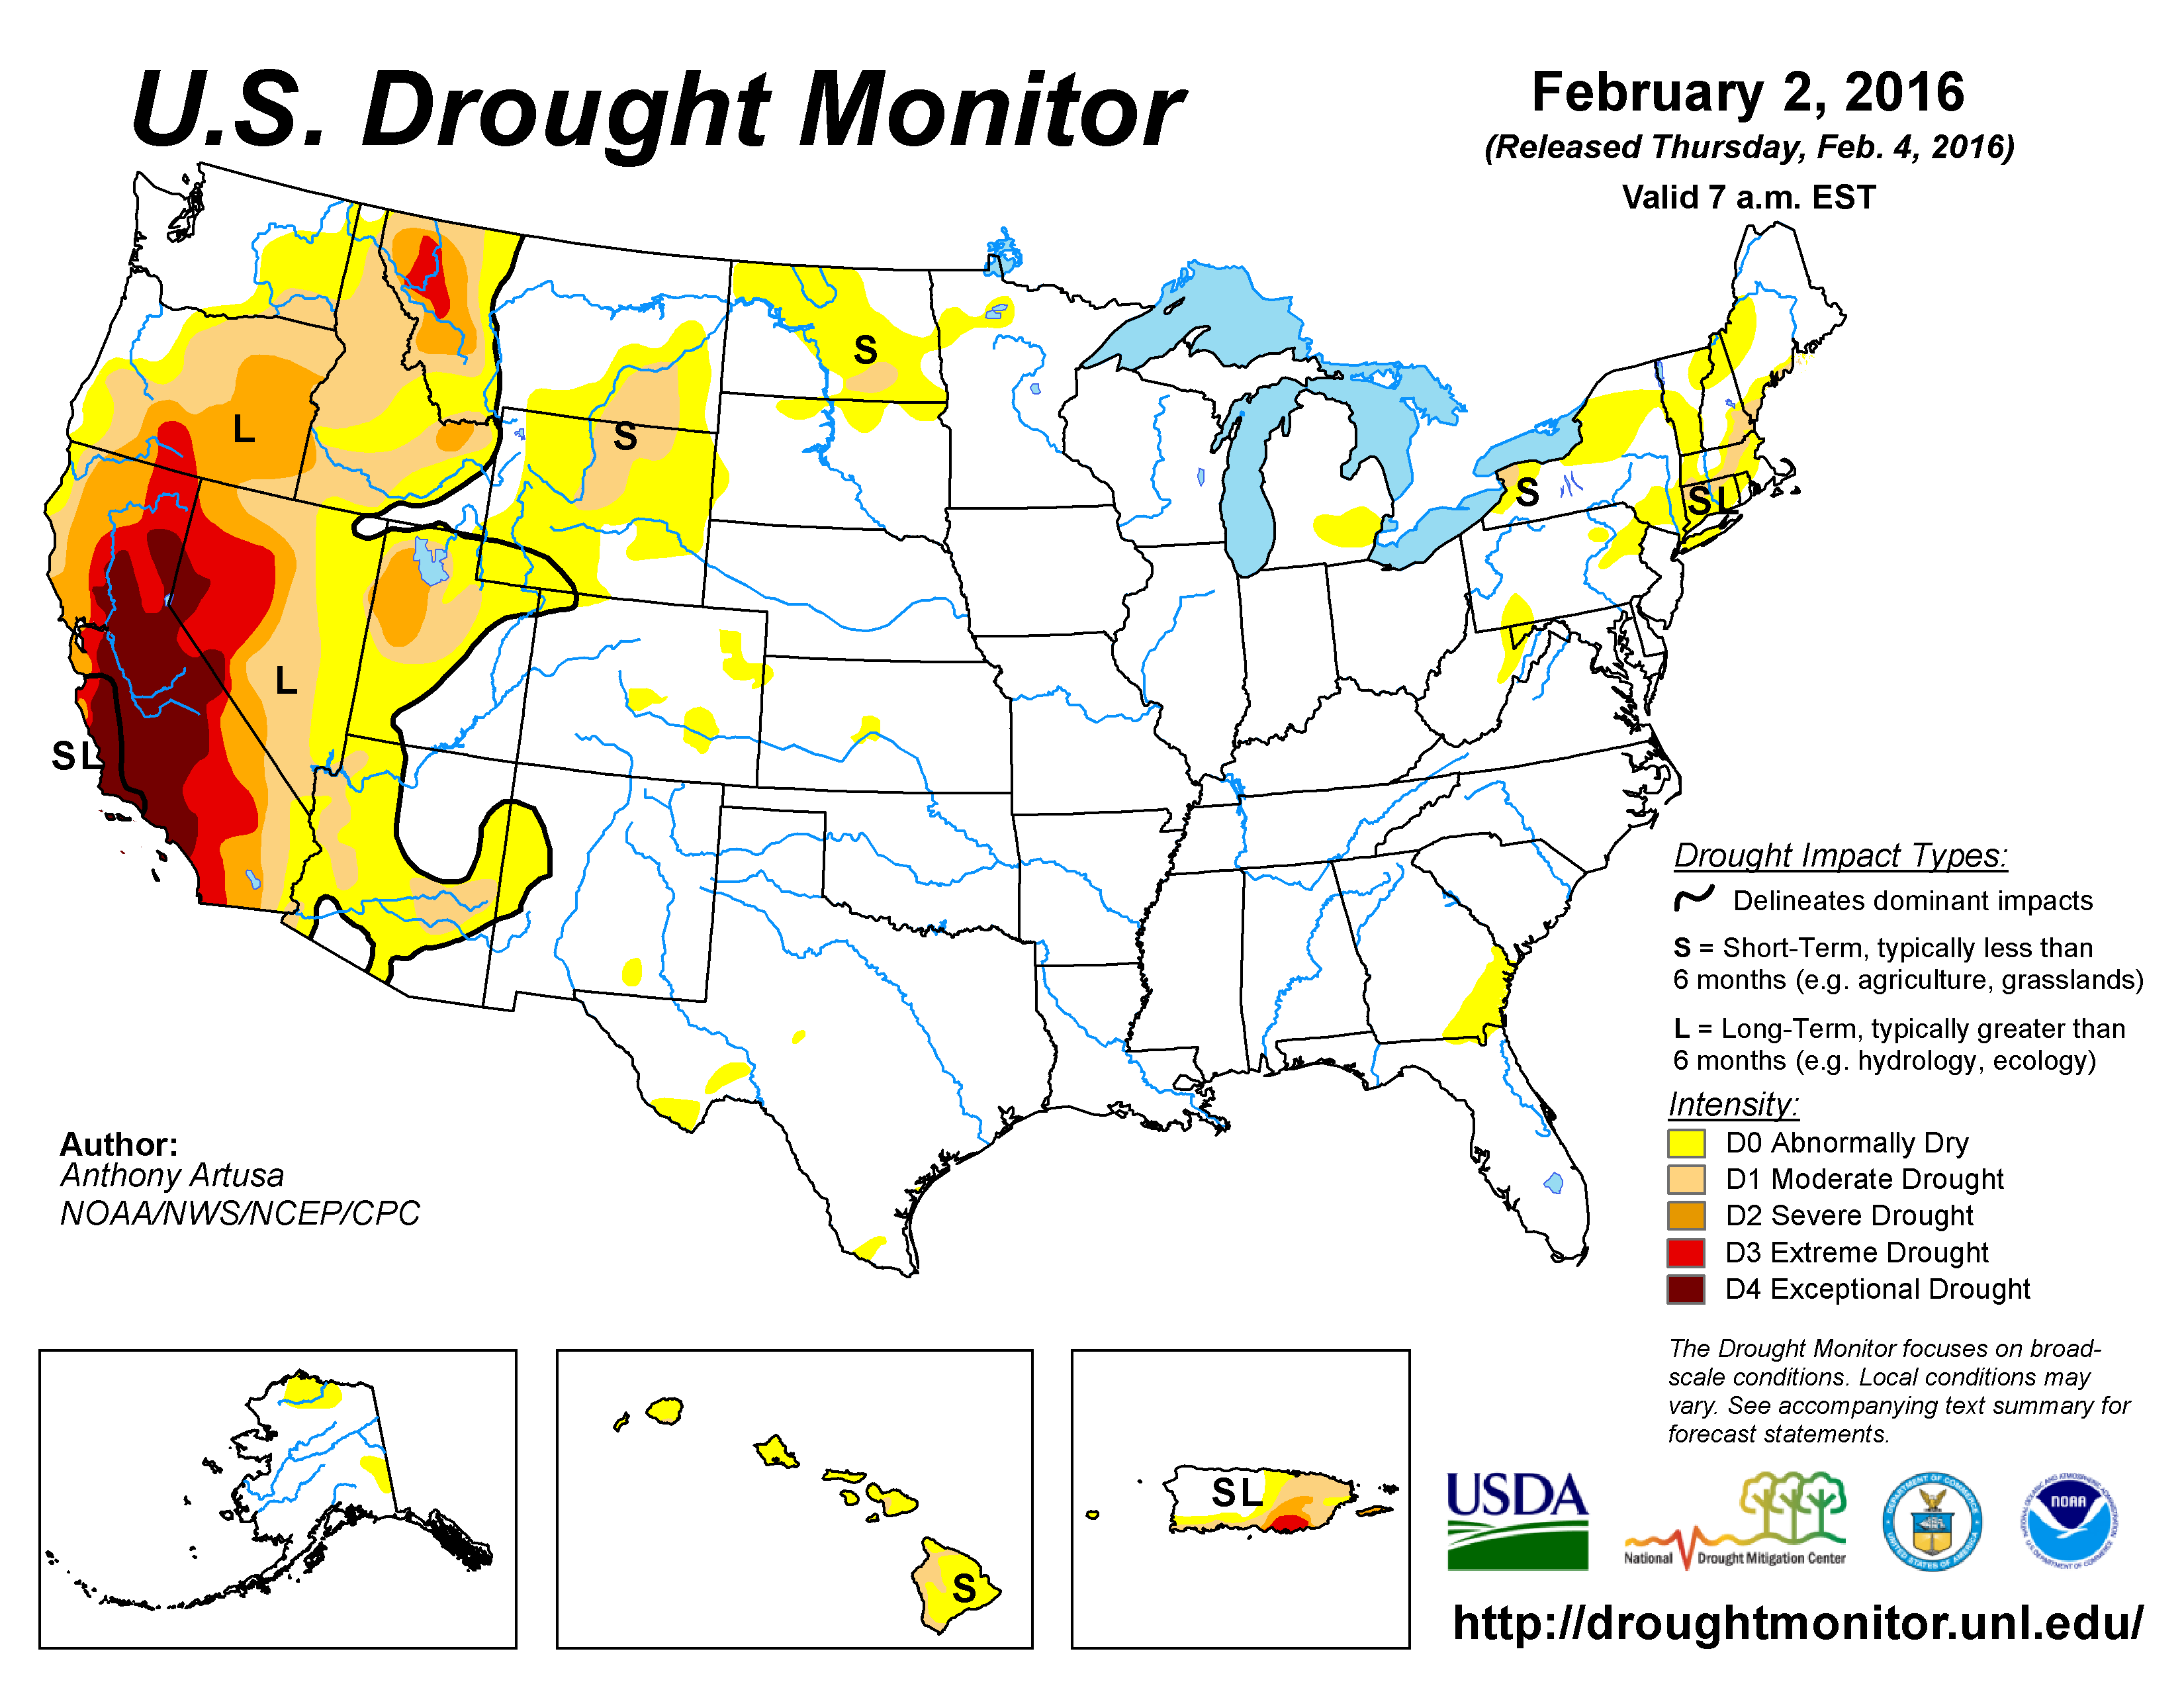 The U.S. Drought Monitor drought map valid February 2, 2016